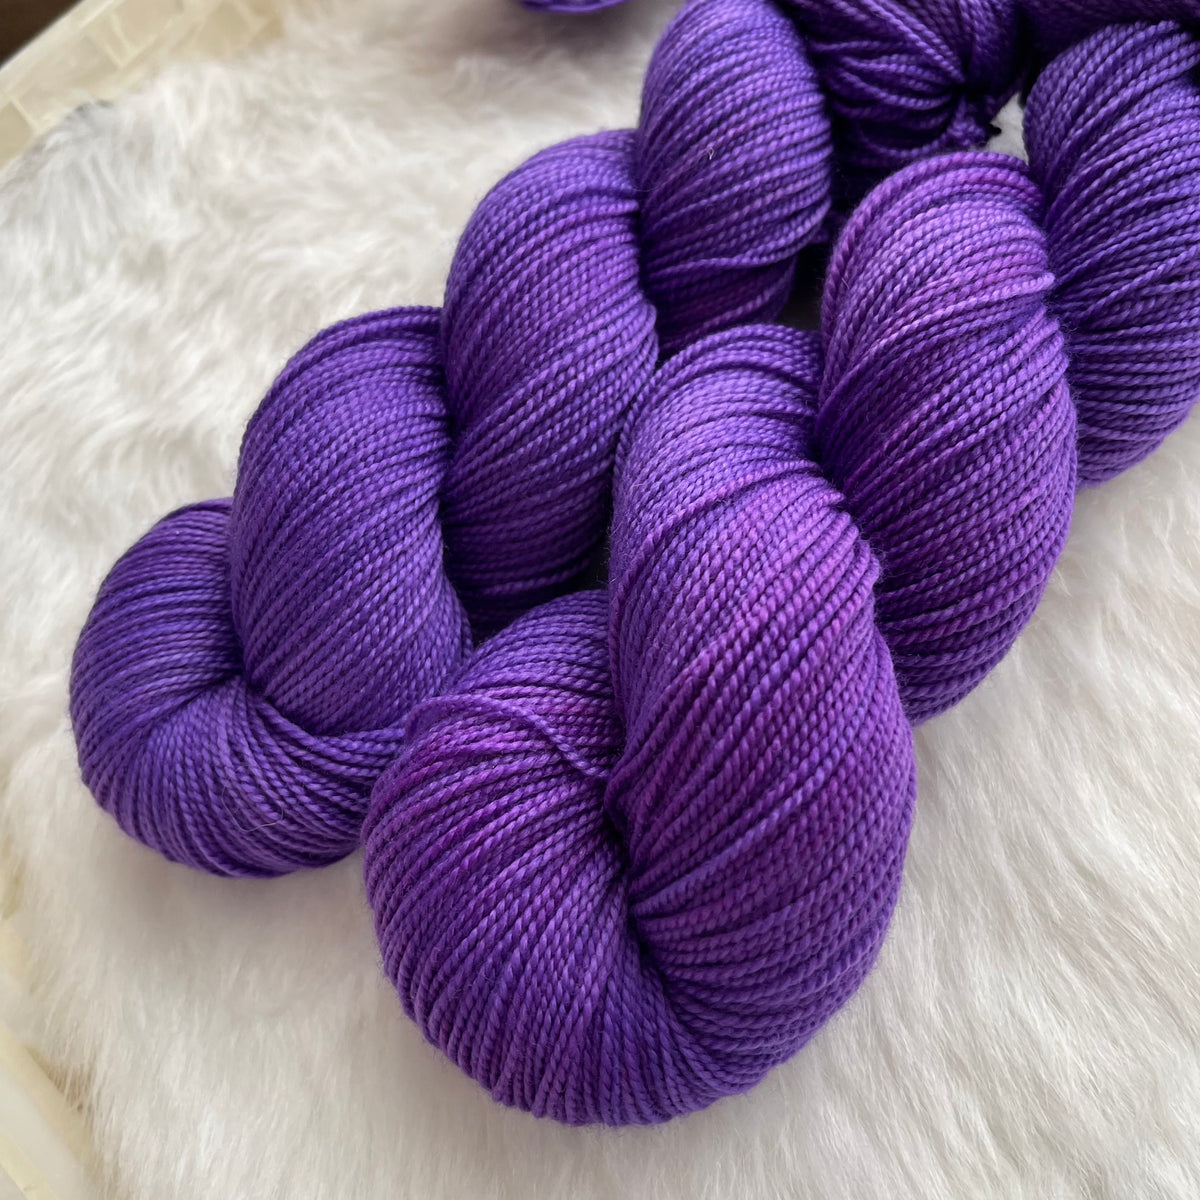 ROYALS - Dyed to Order - Hand Dyed Yarn Skein